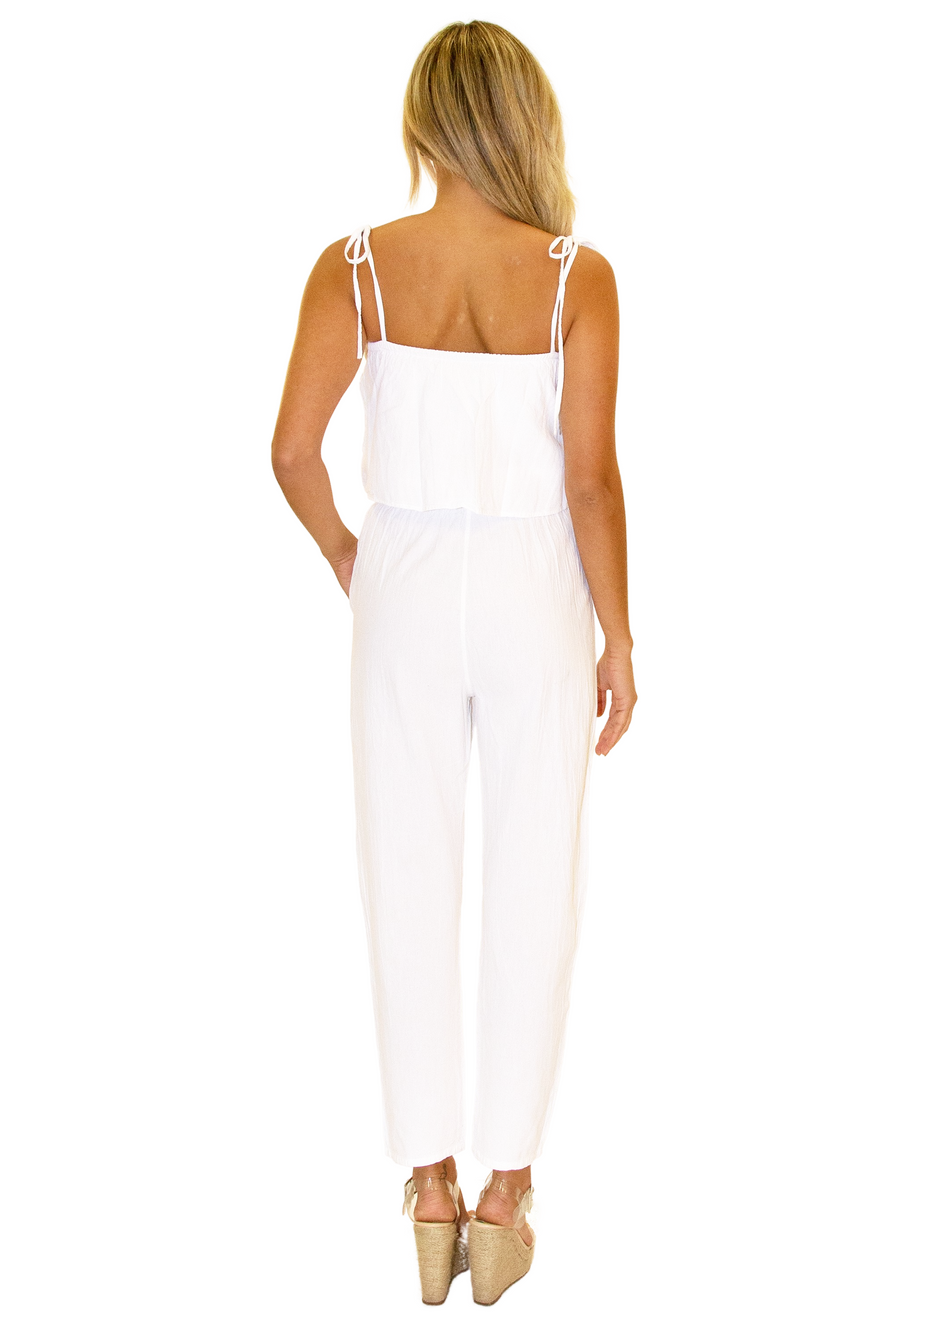 NW1123 - White Cotton Jumpsuit